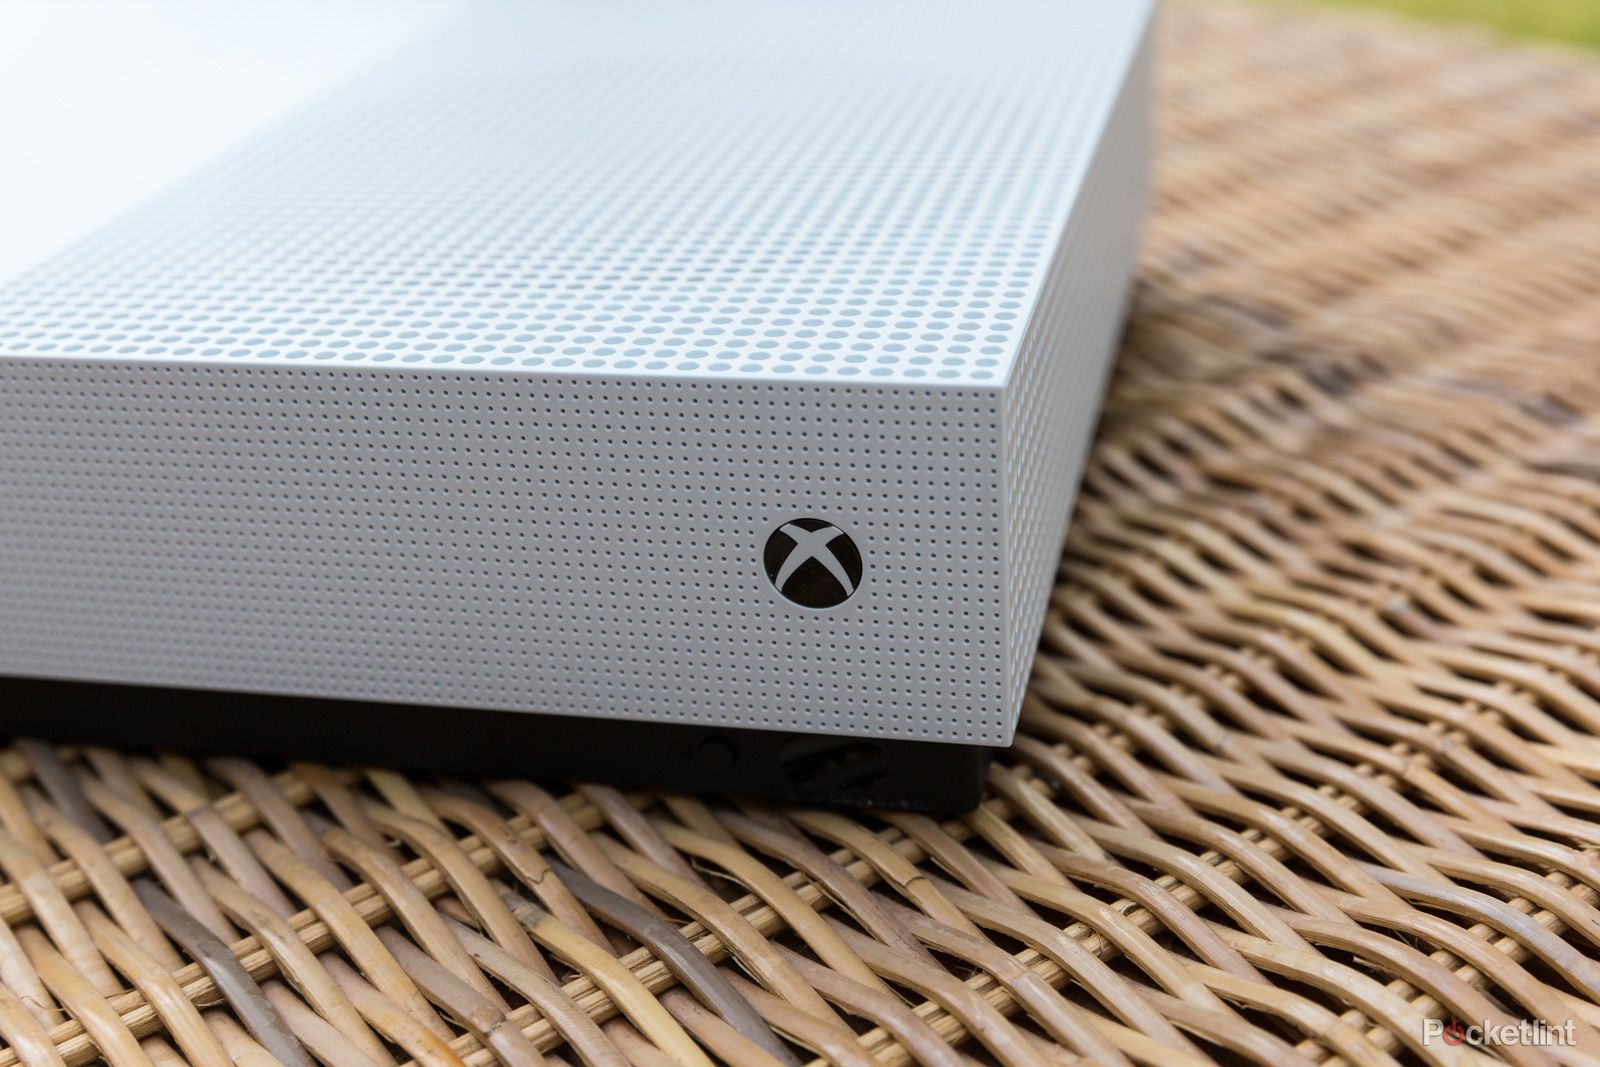 Xbox One S All-Digital Edition product shots image 3